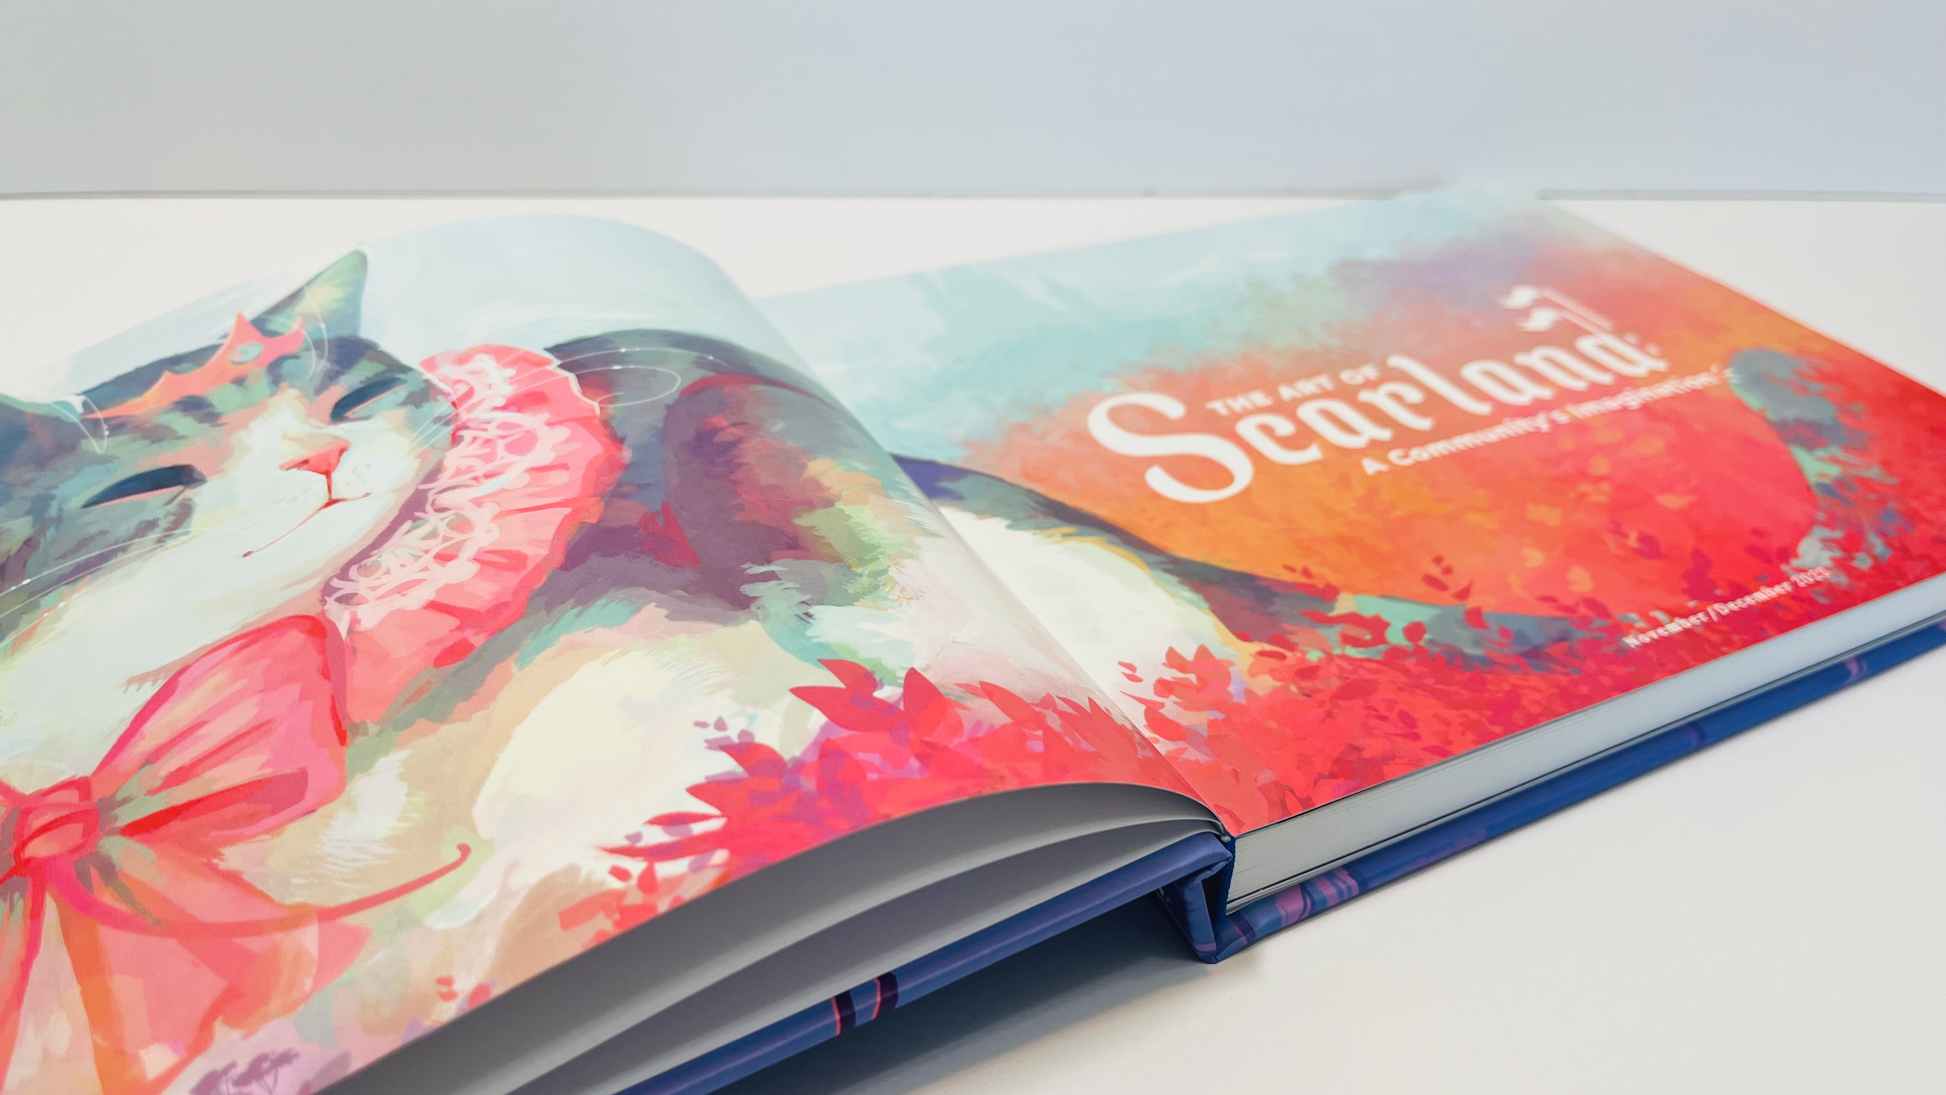 The Scarland Artbook laid flat on a white surface with a white background. It is open to two of the first pages. The pages showcase a beautiful Queen Jellie illustration by Julia Cocoabats, and the title text reads, "The Art of Scarland, A Community's Imagination. November/December 2023"